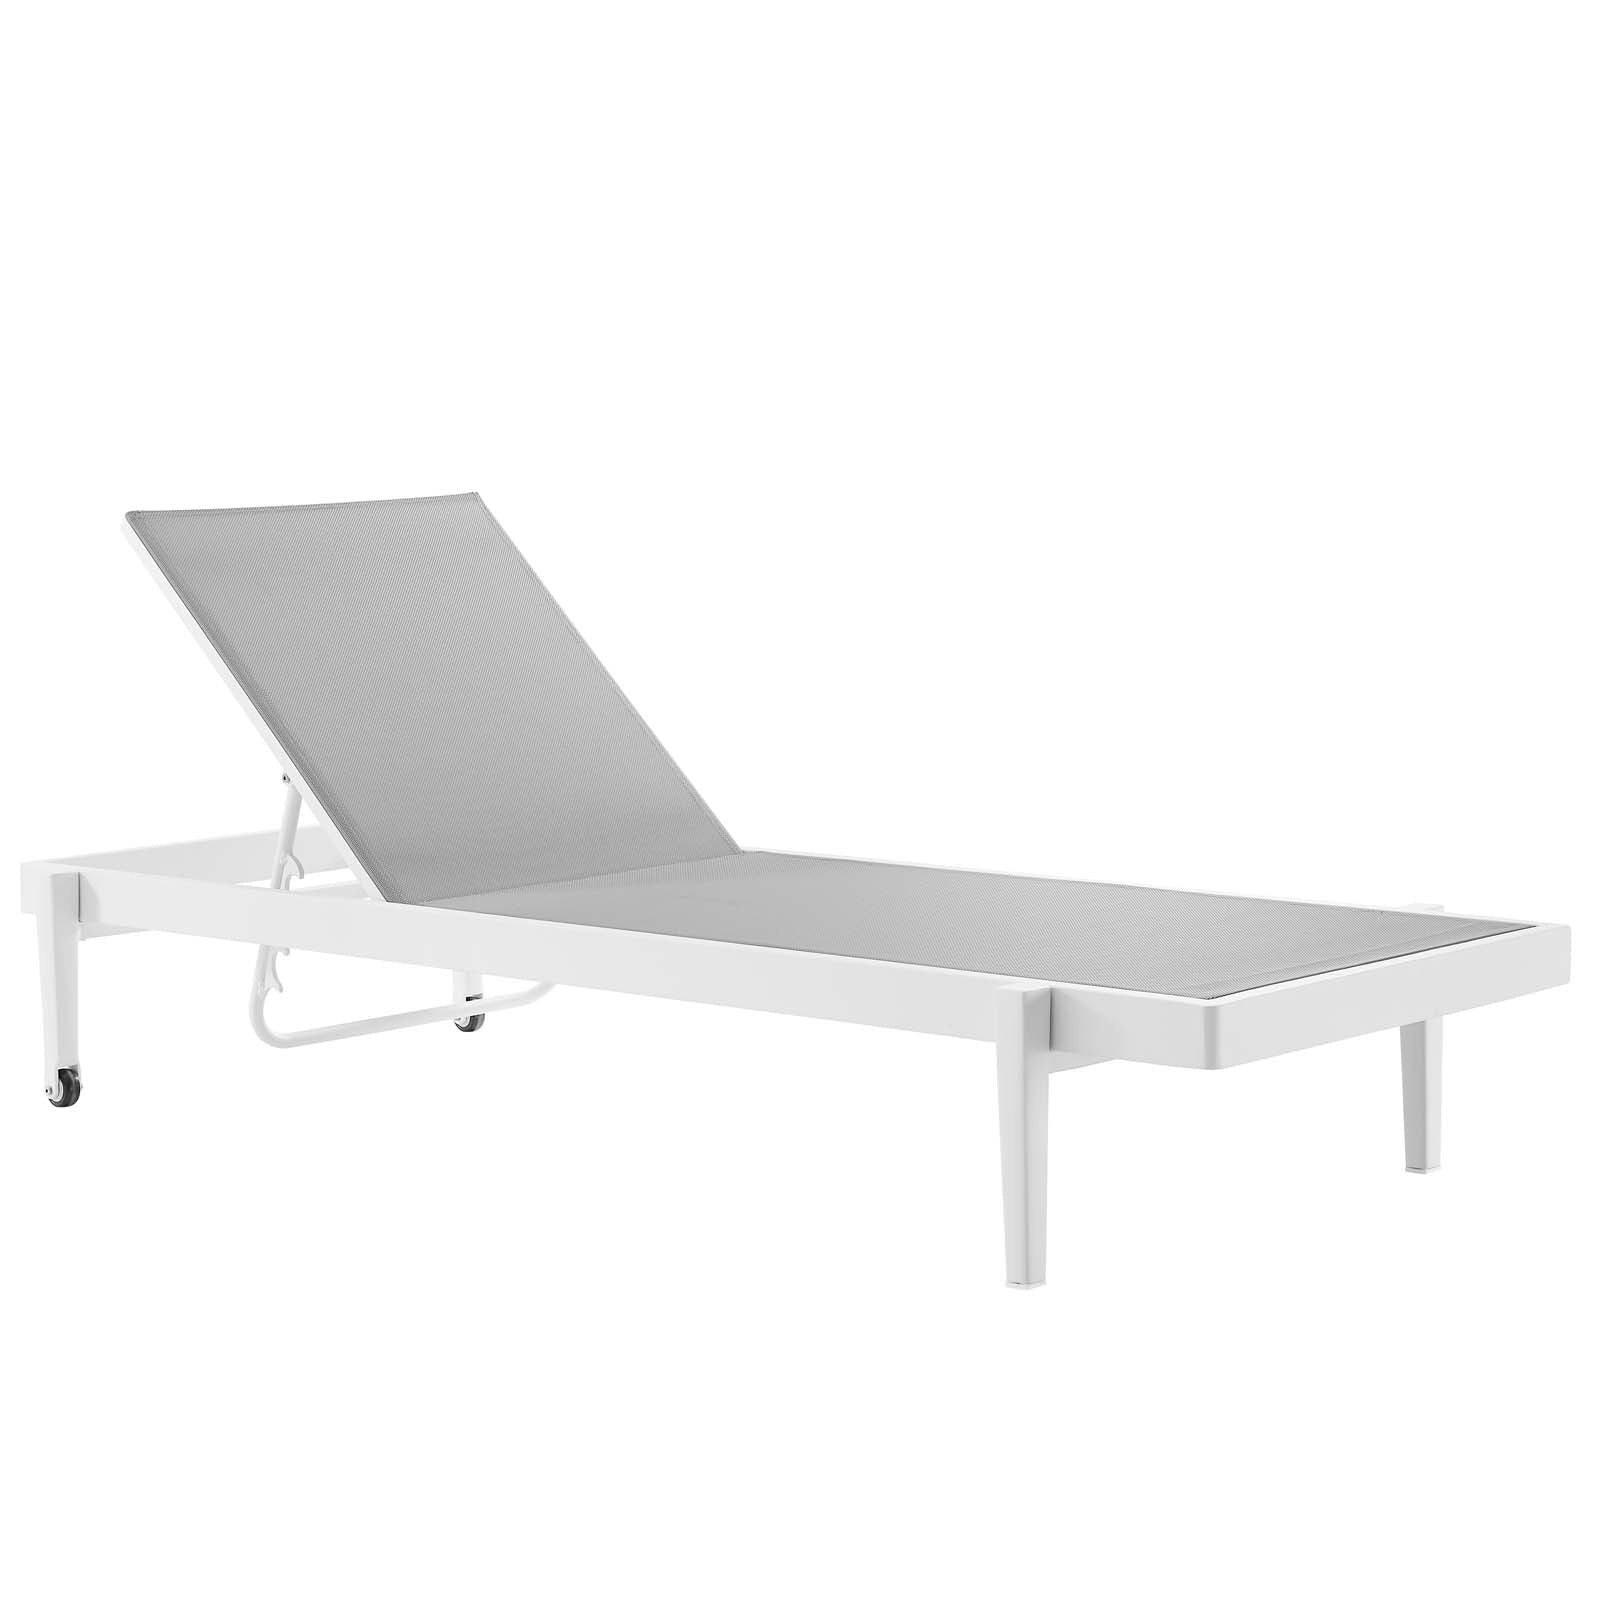 Modway Outdoor Loungers - Charleston Outdoor Patio Chaise Lounge Chair in White & Gray